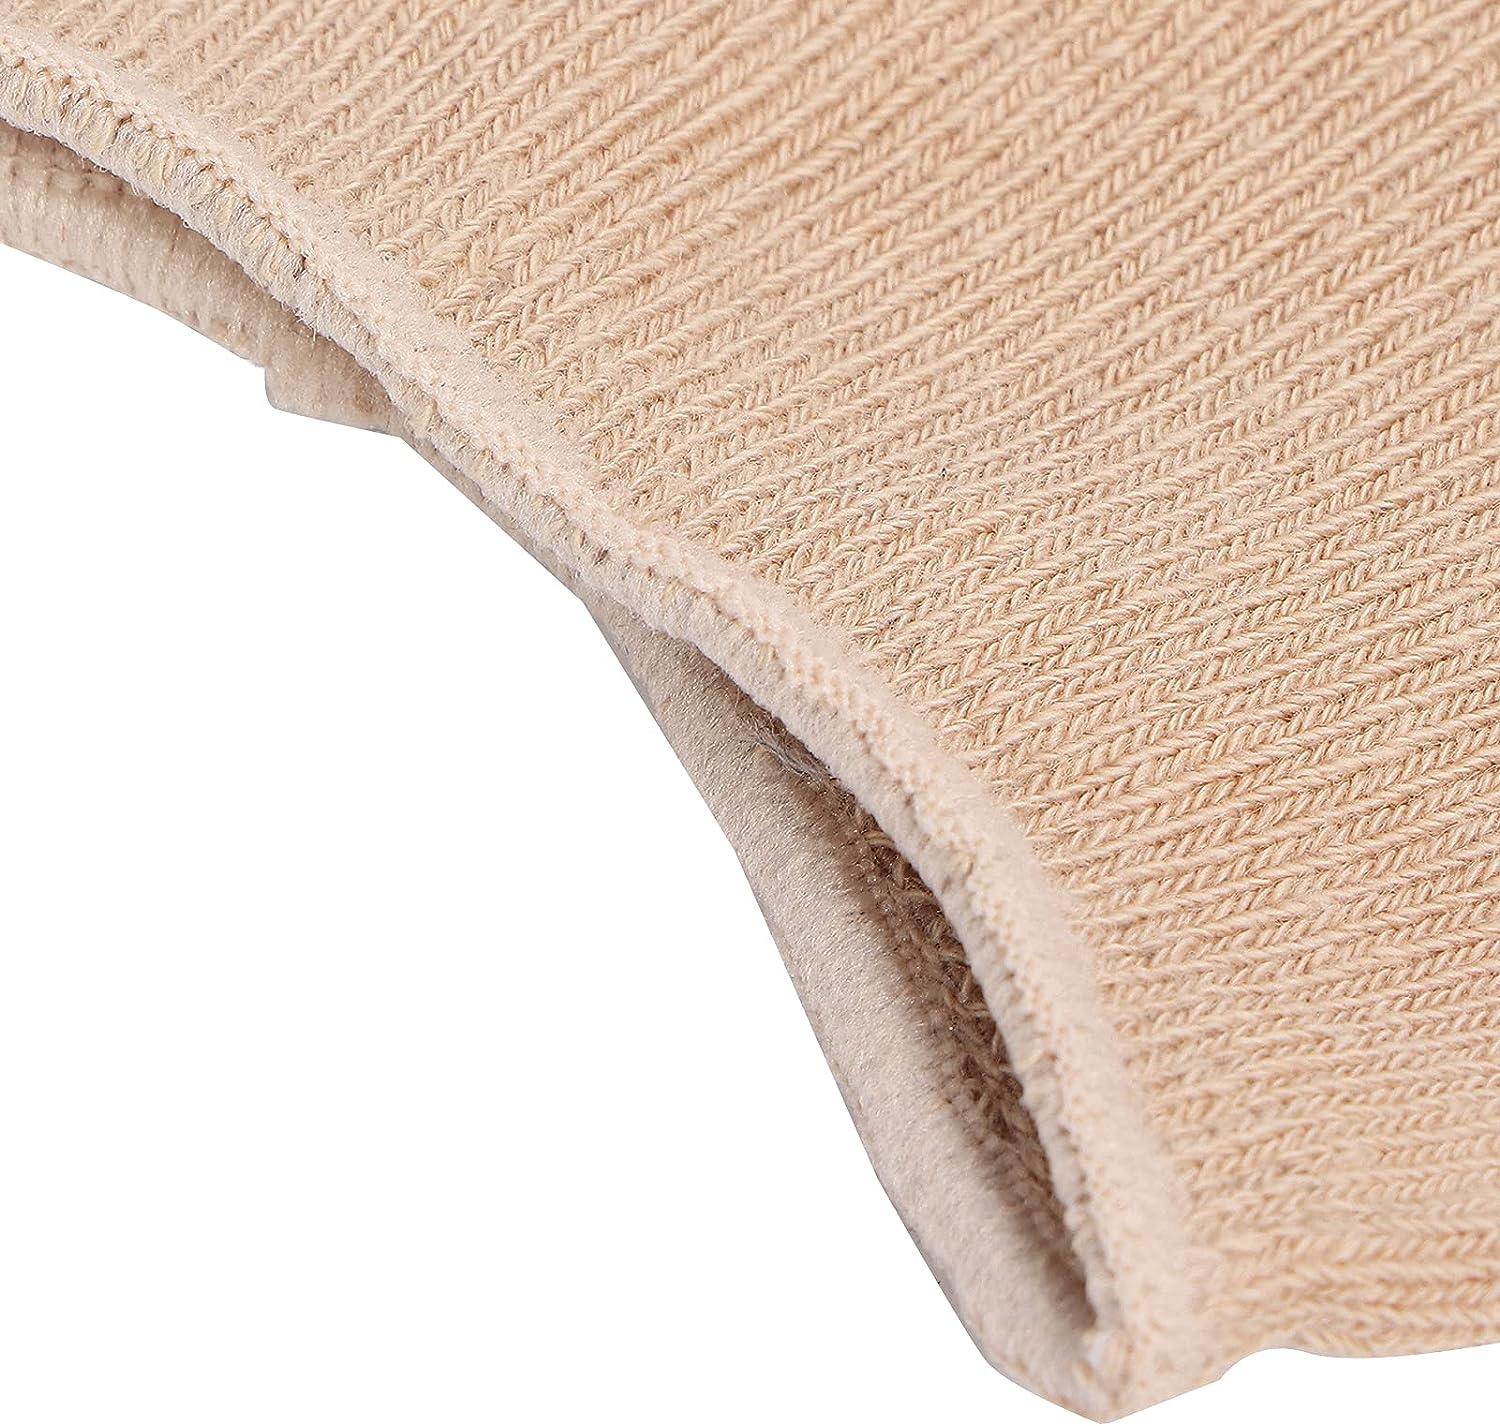  PriceXes Open Five Toes Socks Forefoot Pads Anti Slip